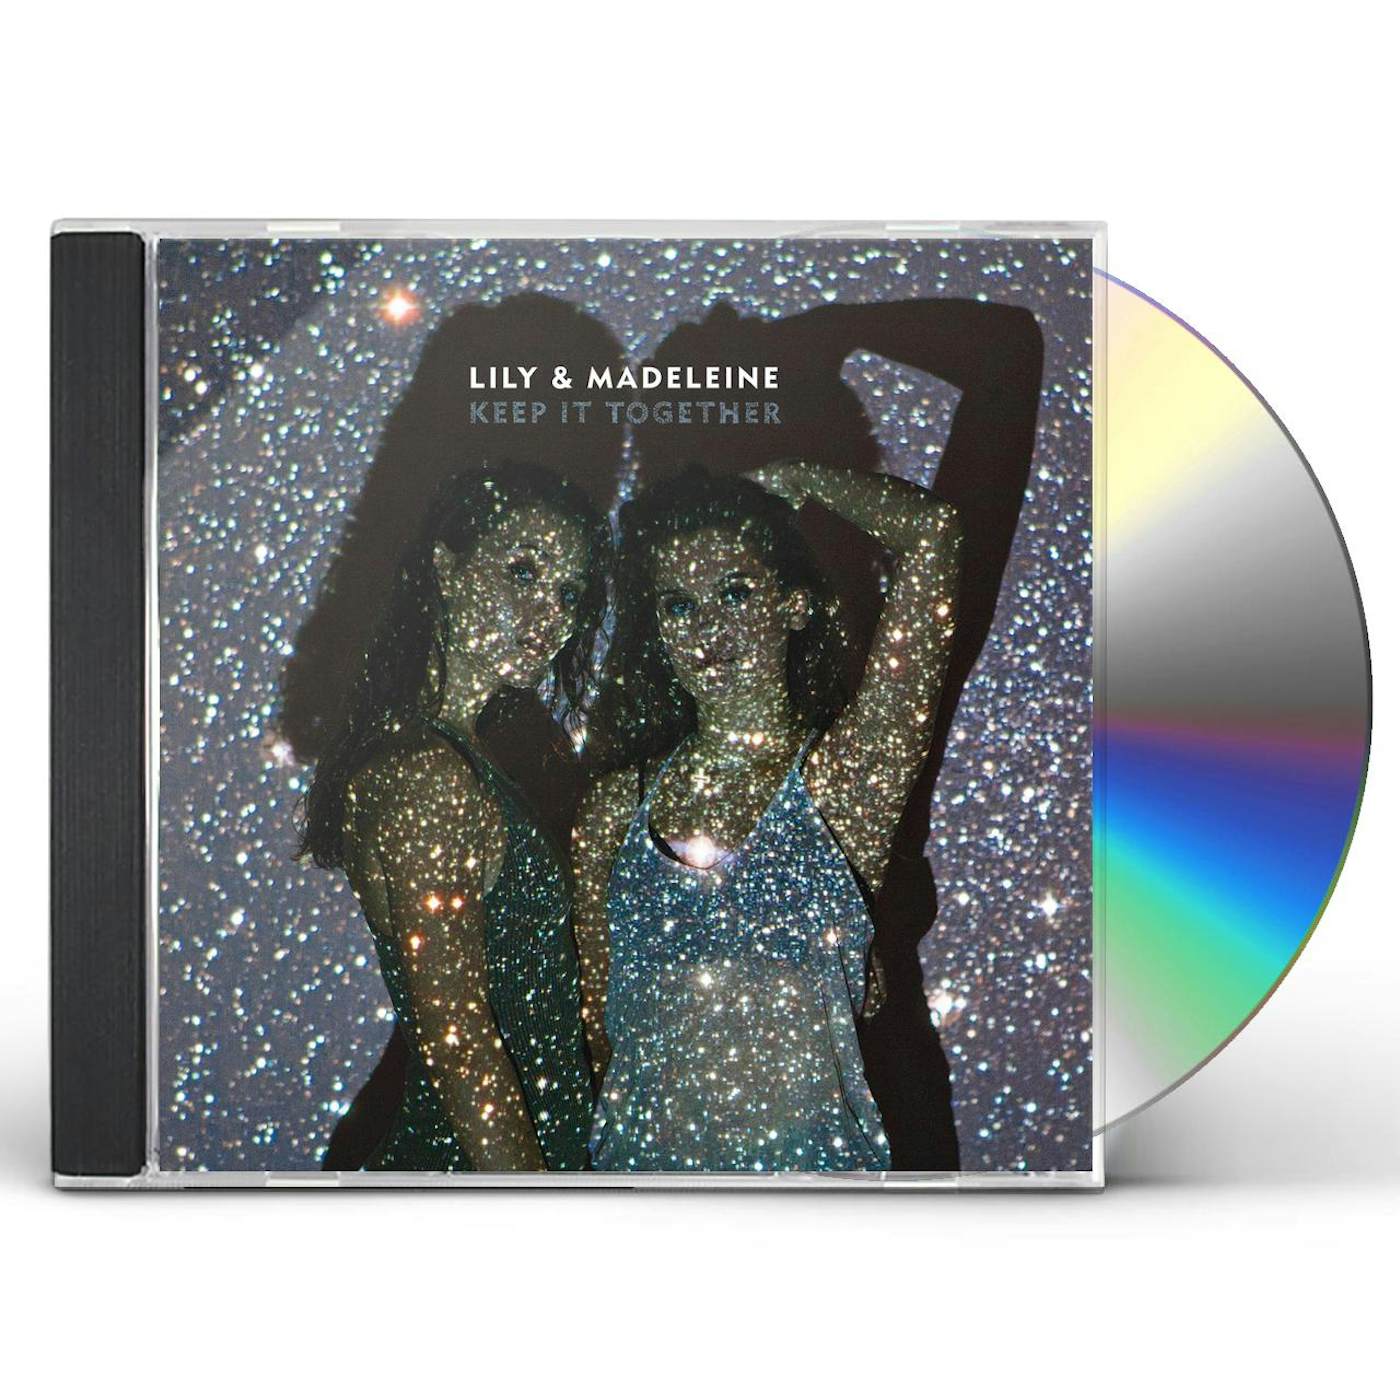 Lily & Madeleine KEEP IT TOGETHER CD